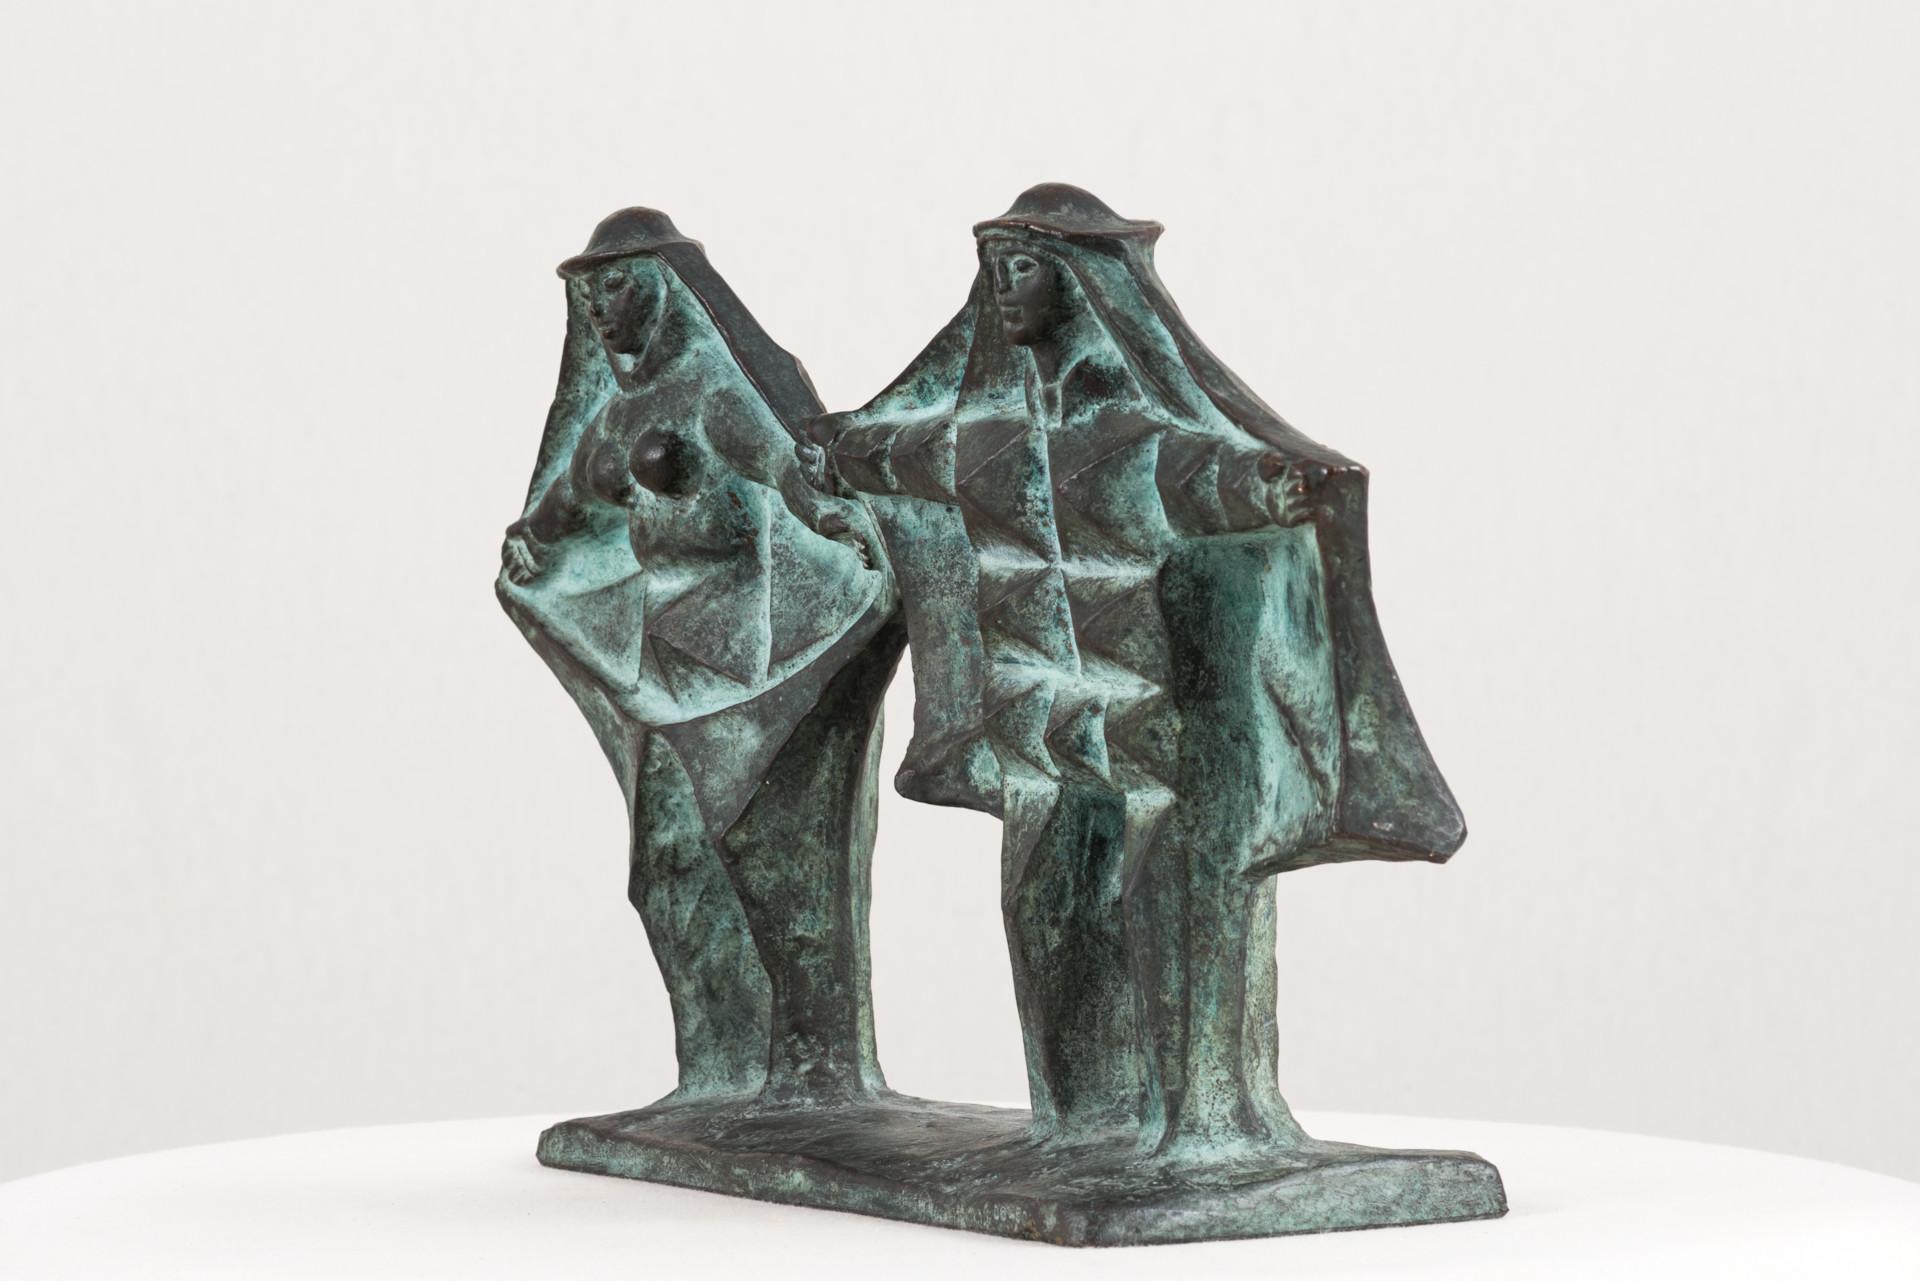 Jorge Vieira (1922-1998) Portuguese sculptor and teacher, belongs to the third generation of Portuguese modernist artists, and was considered by José Augusto França (recognized historian and art critic of the Portuguese art scene) as the most